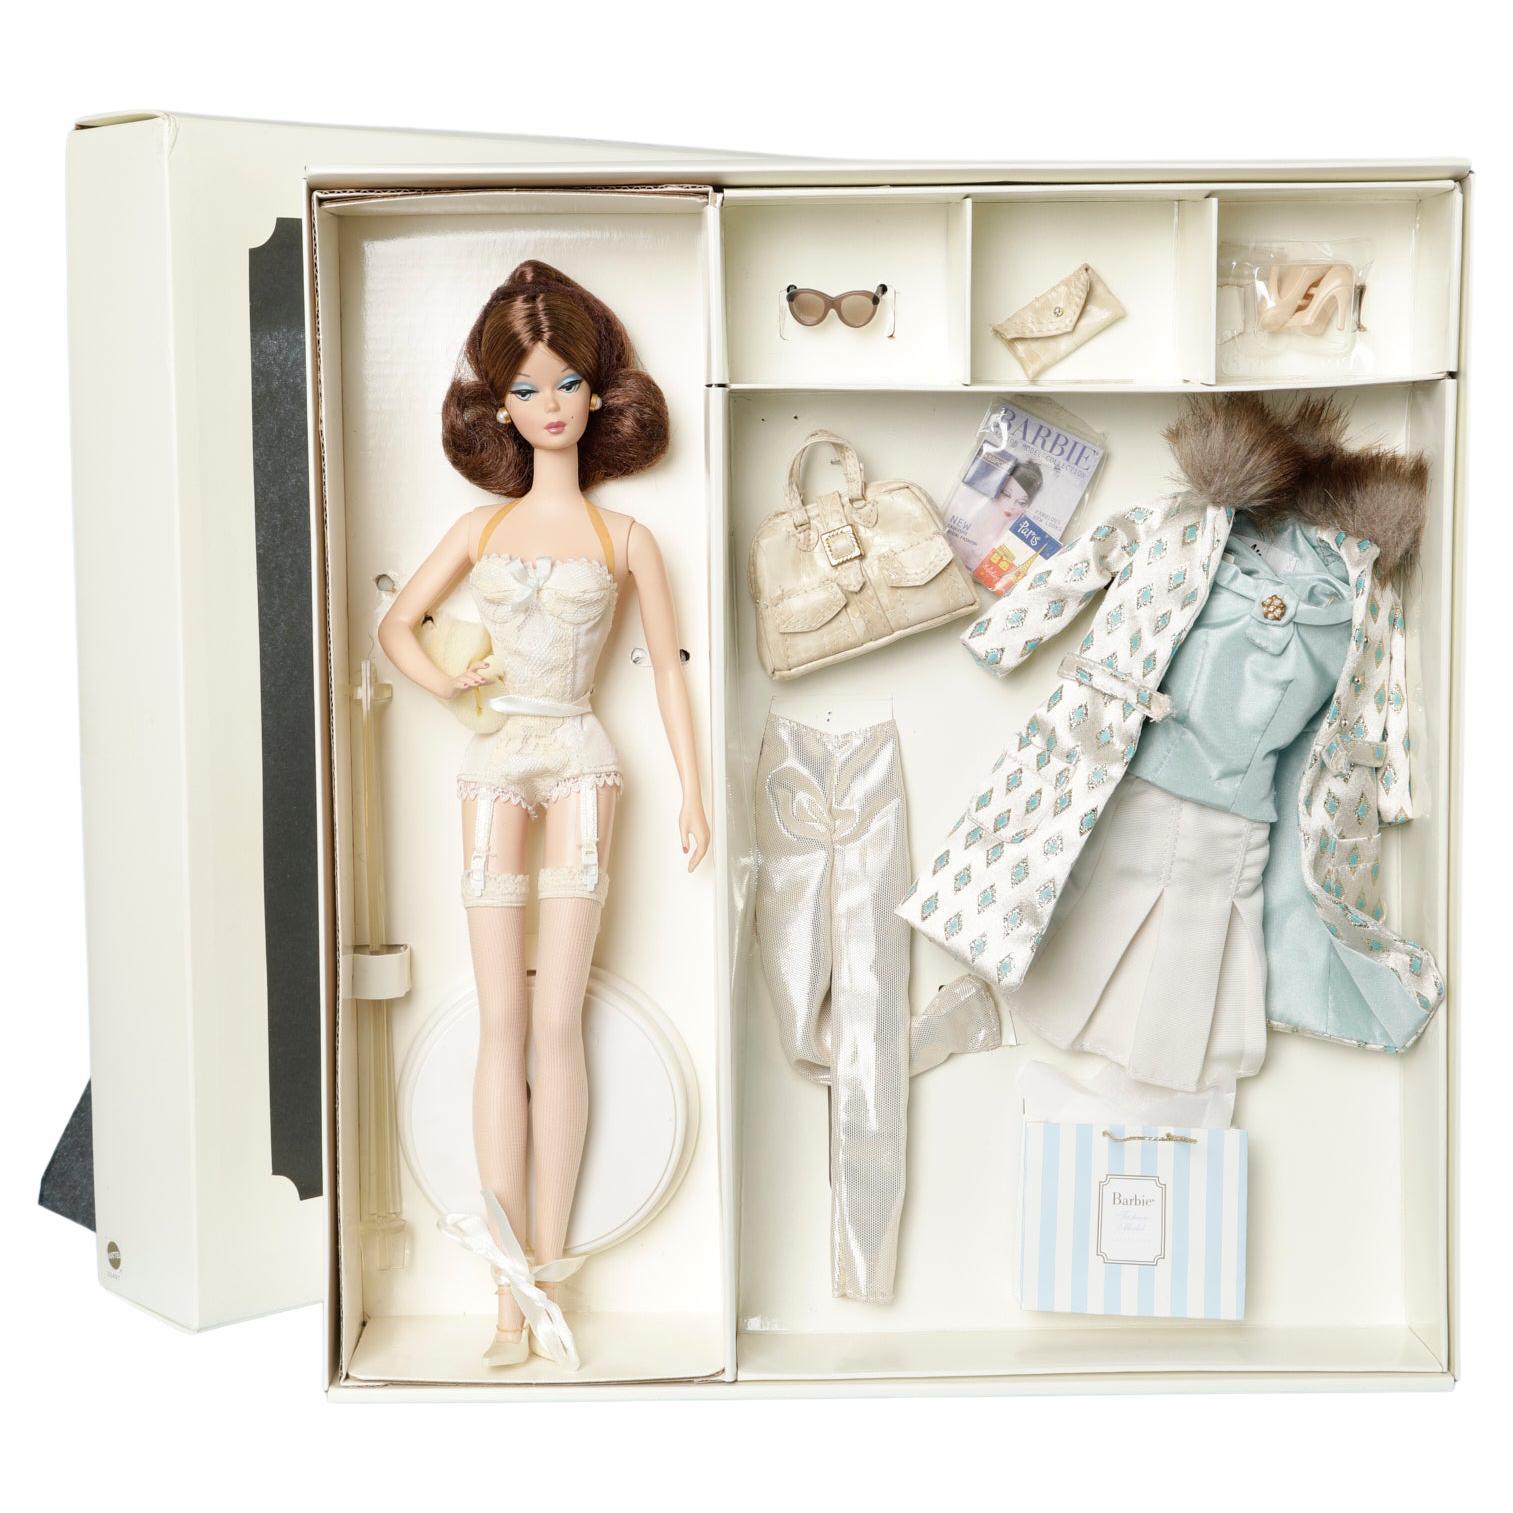 Barbie Fashion Model / "Continental holiday" / Barbie Gift set For Sale